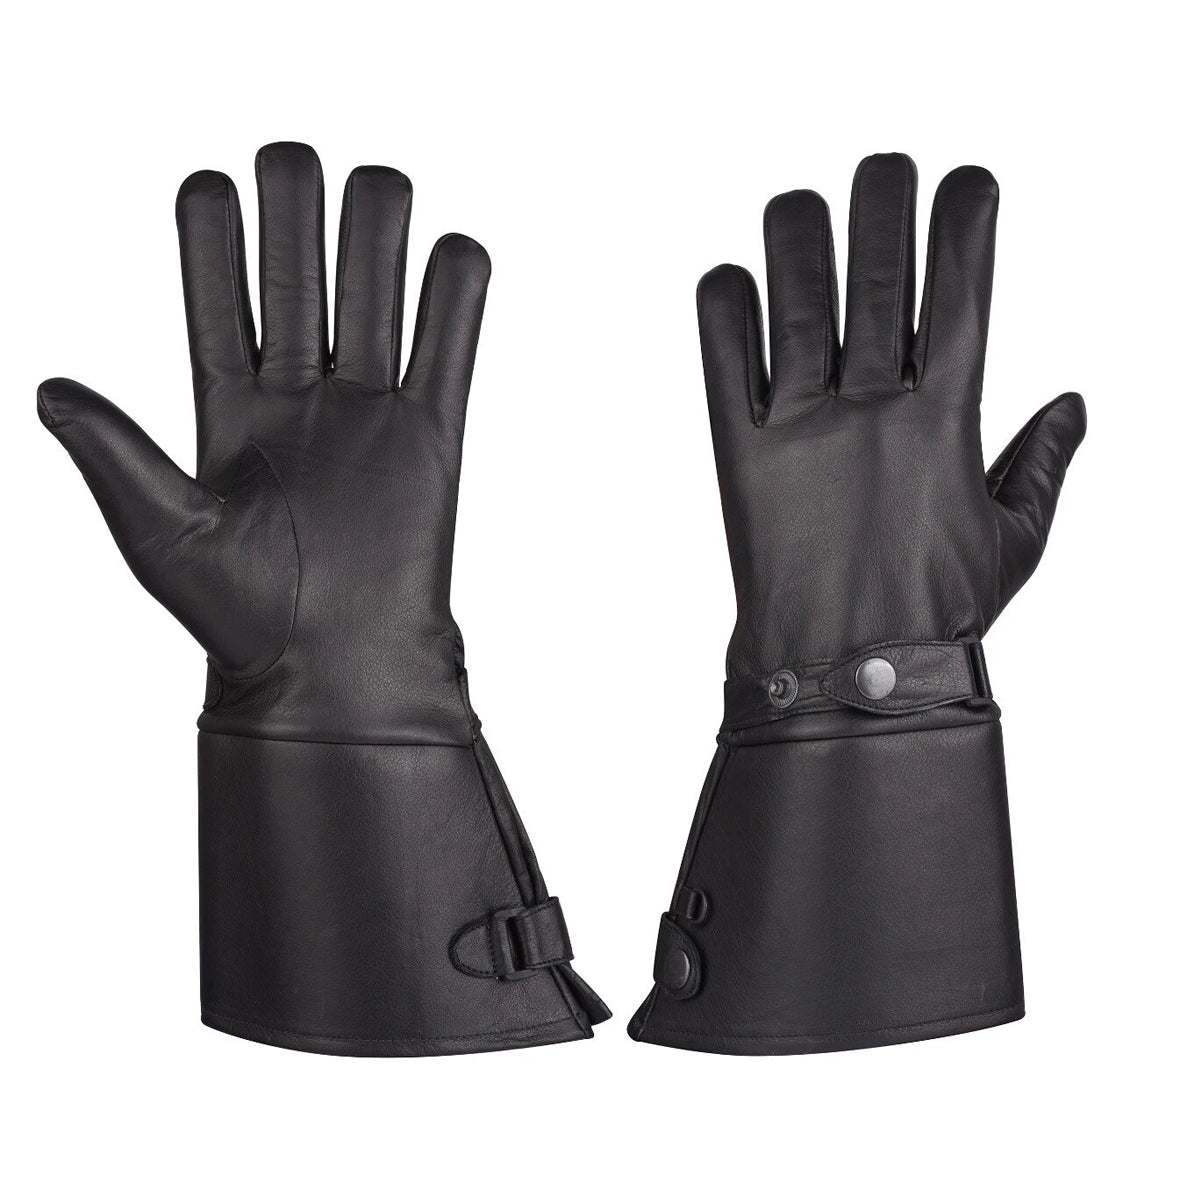 MEN’S THERMAL LINED LEATHER GAUNTLET GLOVES W SNAP WRIST & CUFF